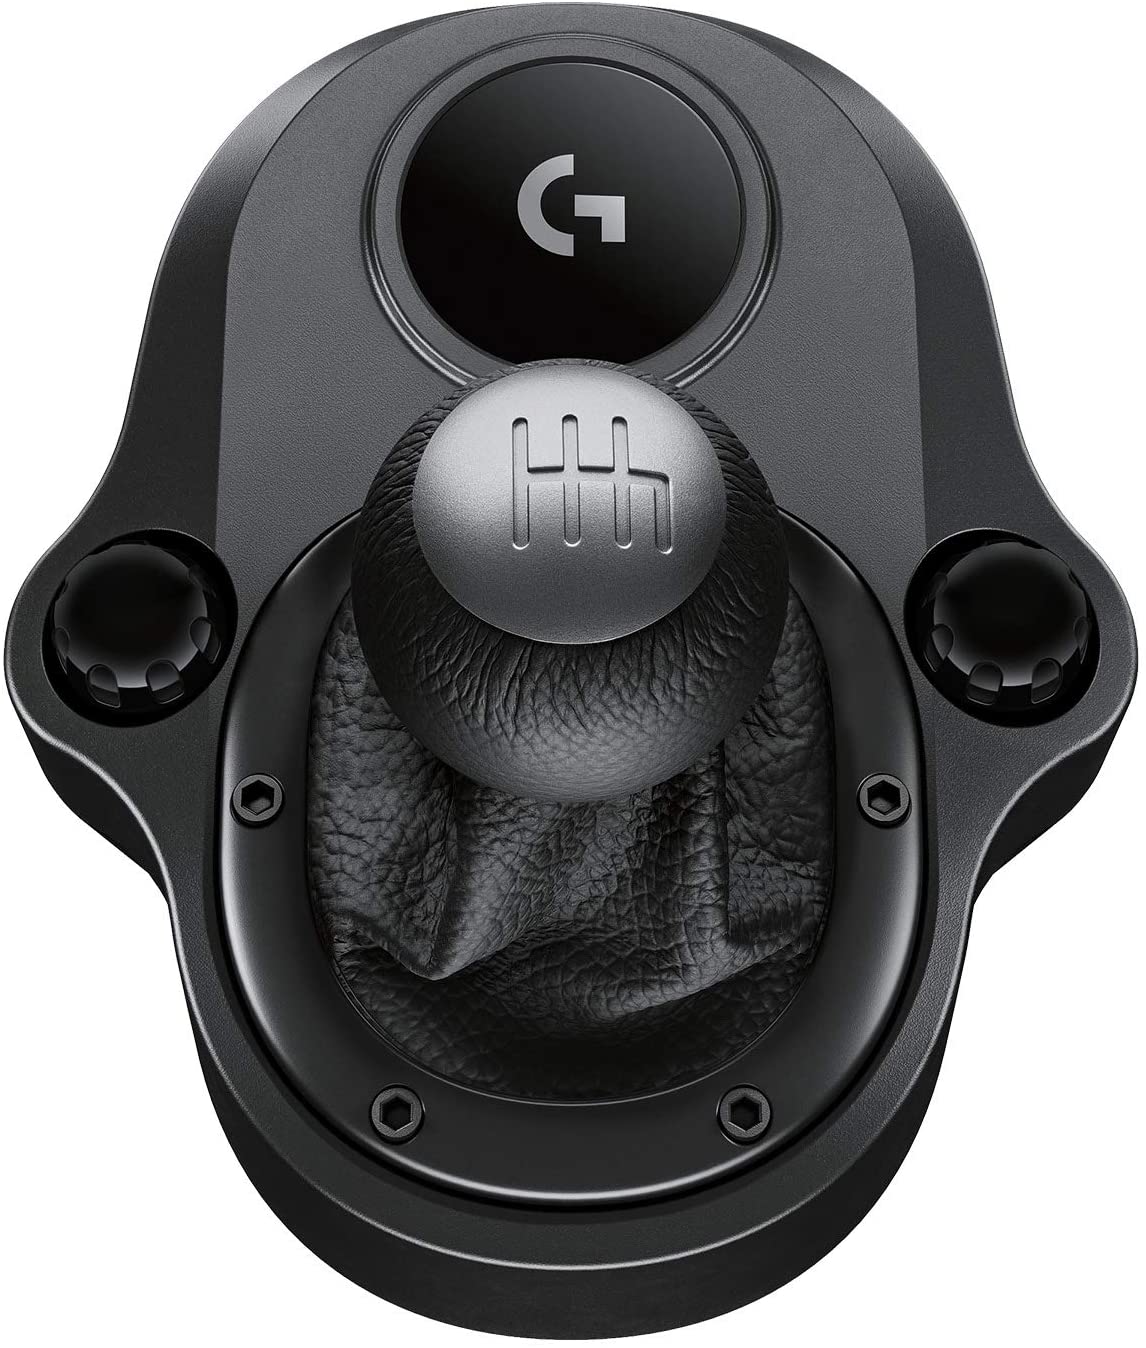 logitech G Driving Force Shifter -Compatible with G29 and G920 Driving Force Racing Wheels for PlayStation 4, Xbox One, and PC.